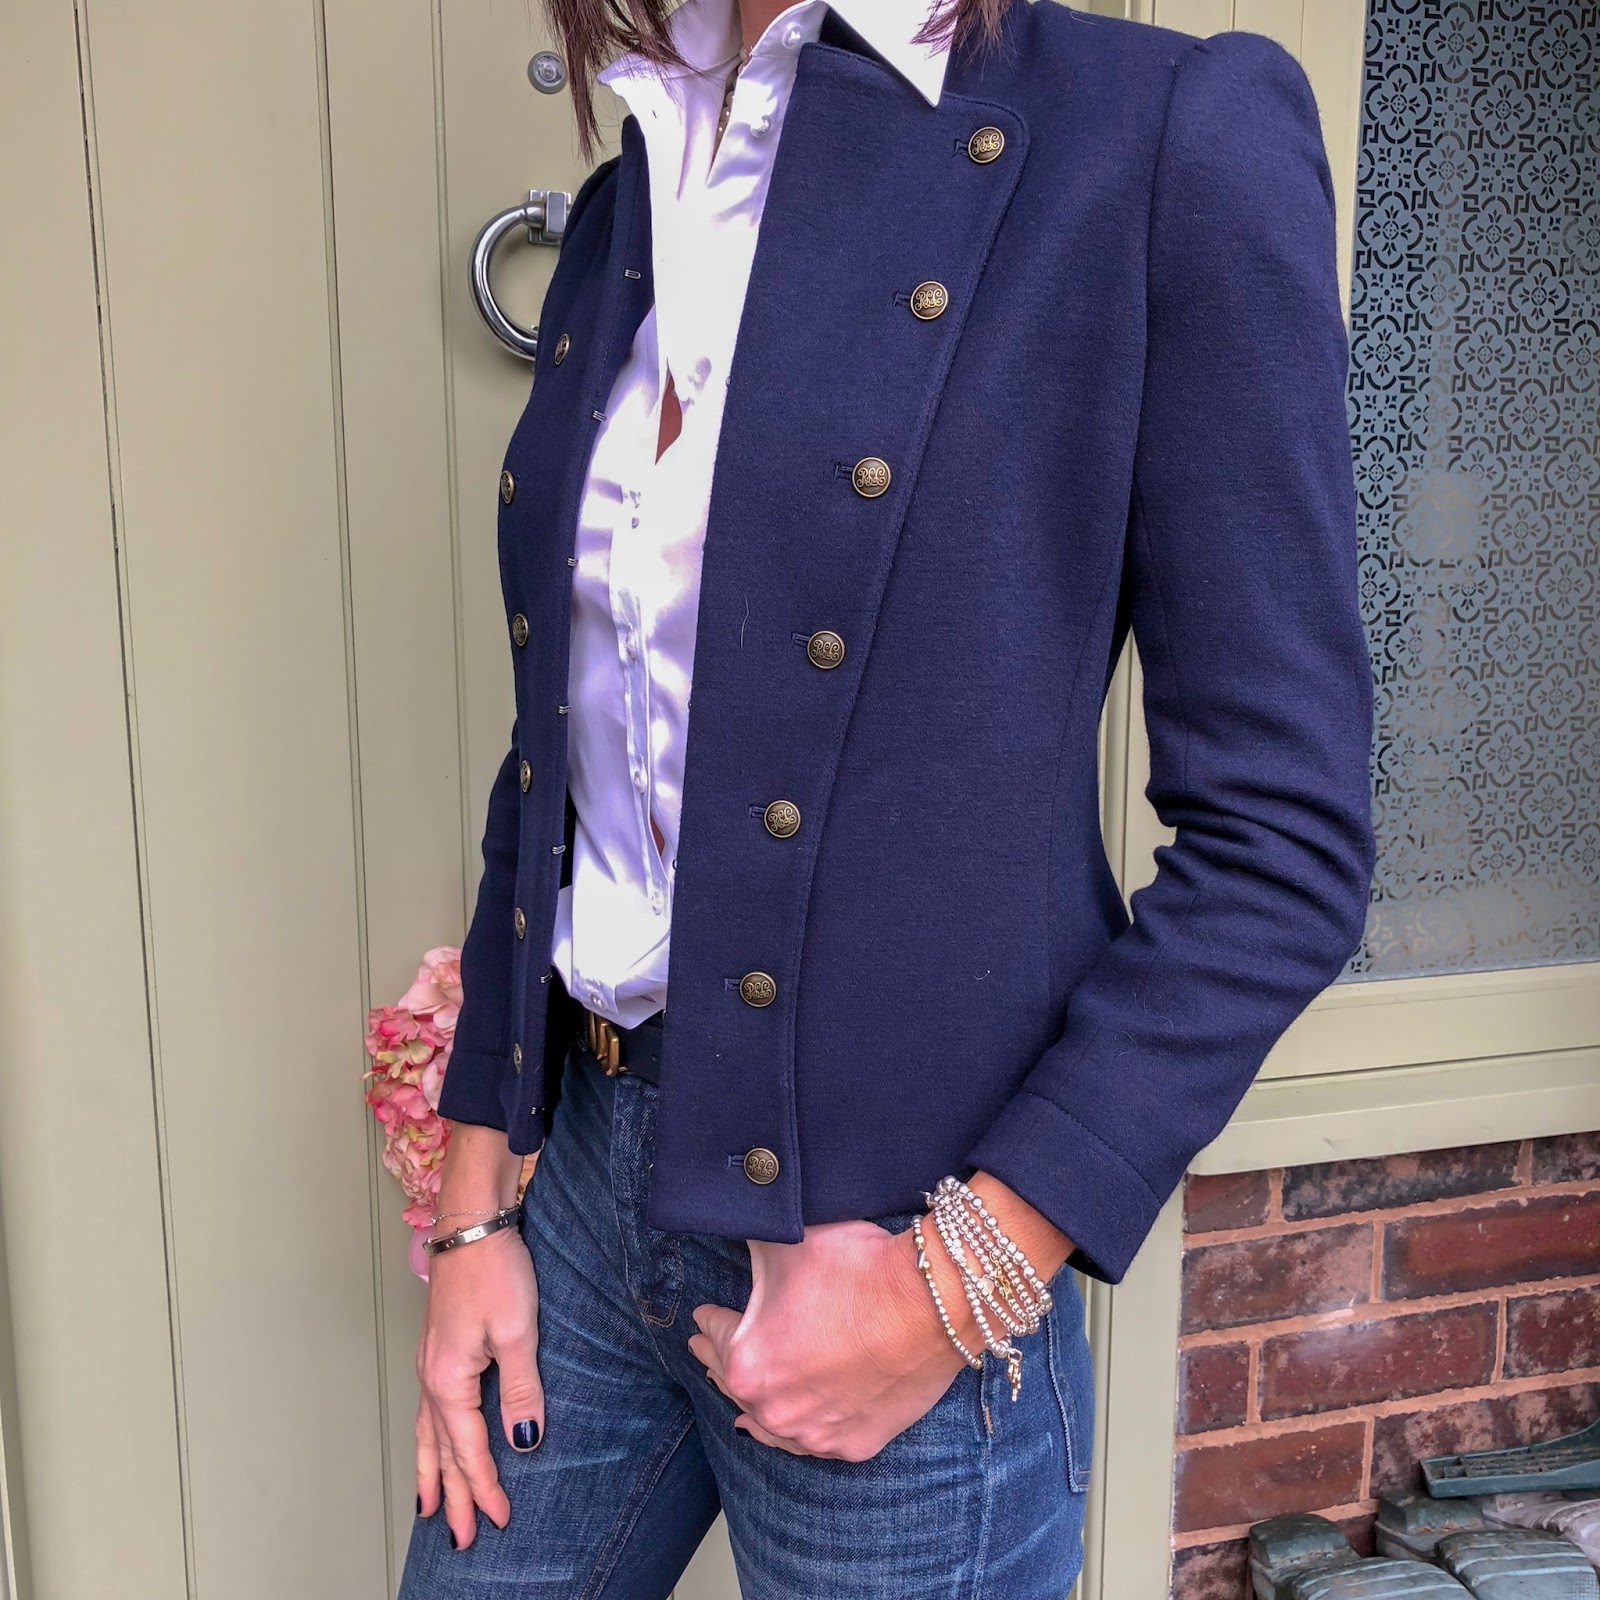 my midlife fashion, hawes and curtis white poplin semi fitted shirt single cuff, ralph lauren wool military jacket, j crew twisted hammock pearl necklace, gucci double GG belt, j crew cropped kick flare jeans, marks and spencer stiletto heel side zip ankle boots